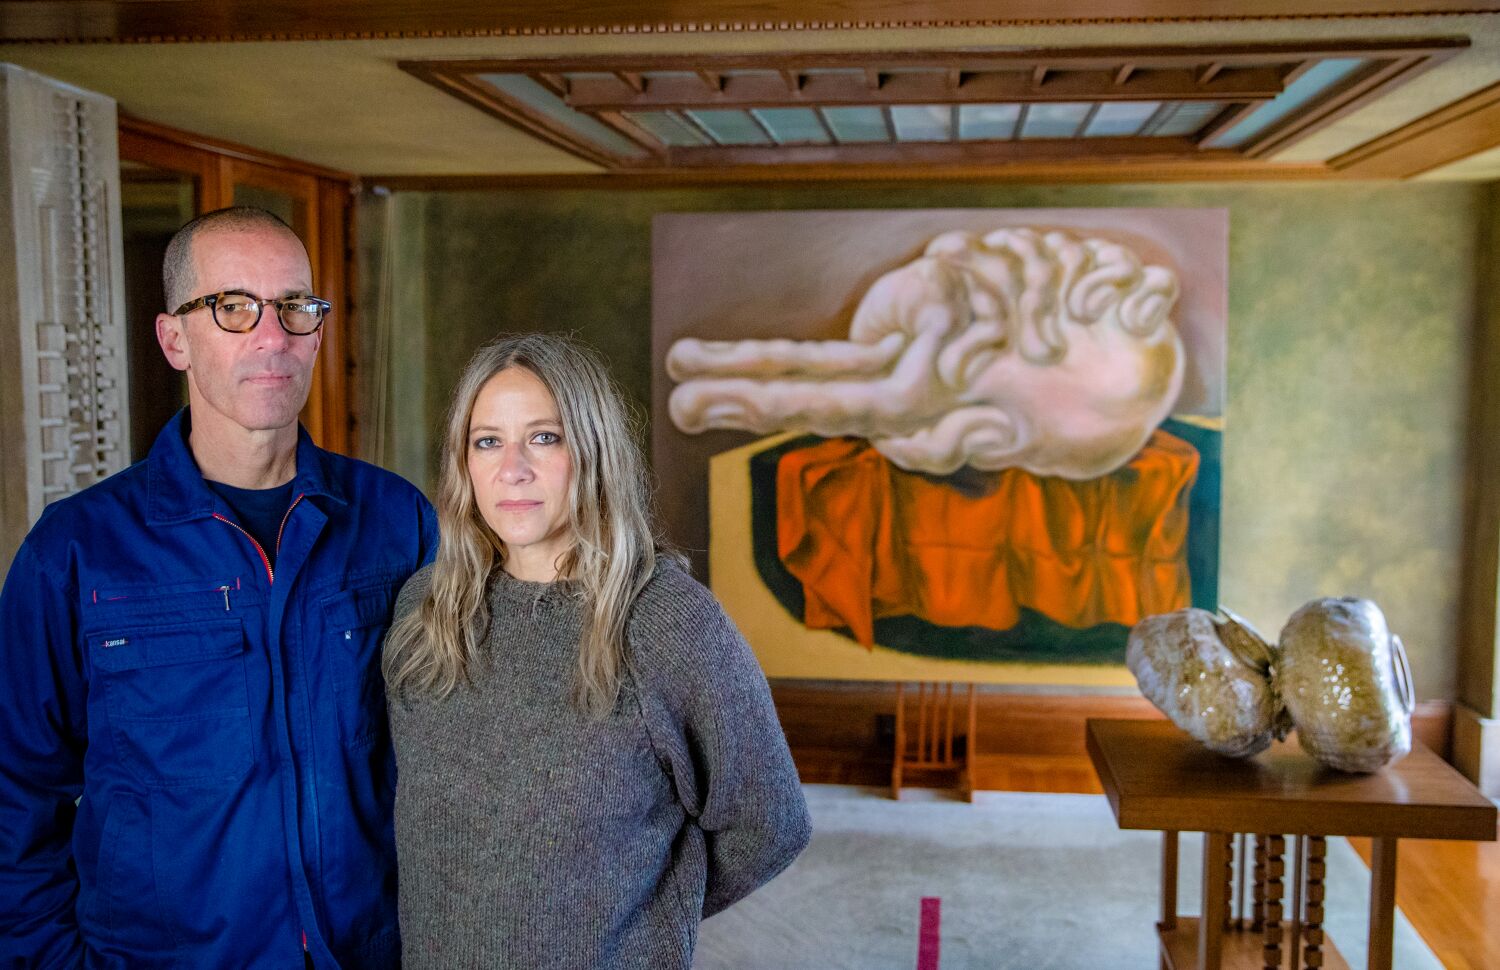 Aline Barnsdall, Frank Lloyd Wright famously clashed over the Hollyhock House. An art show there explores that tension